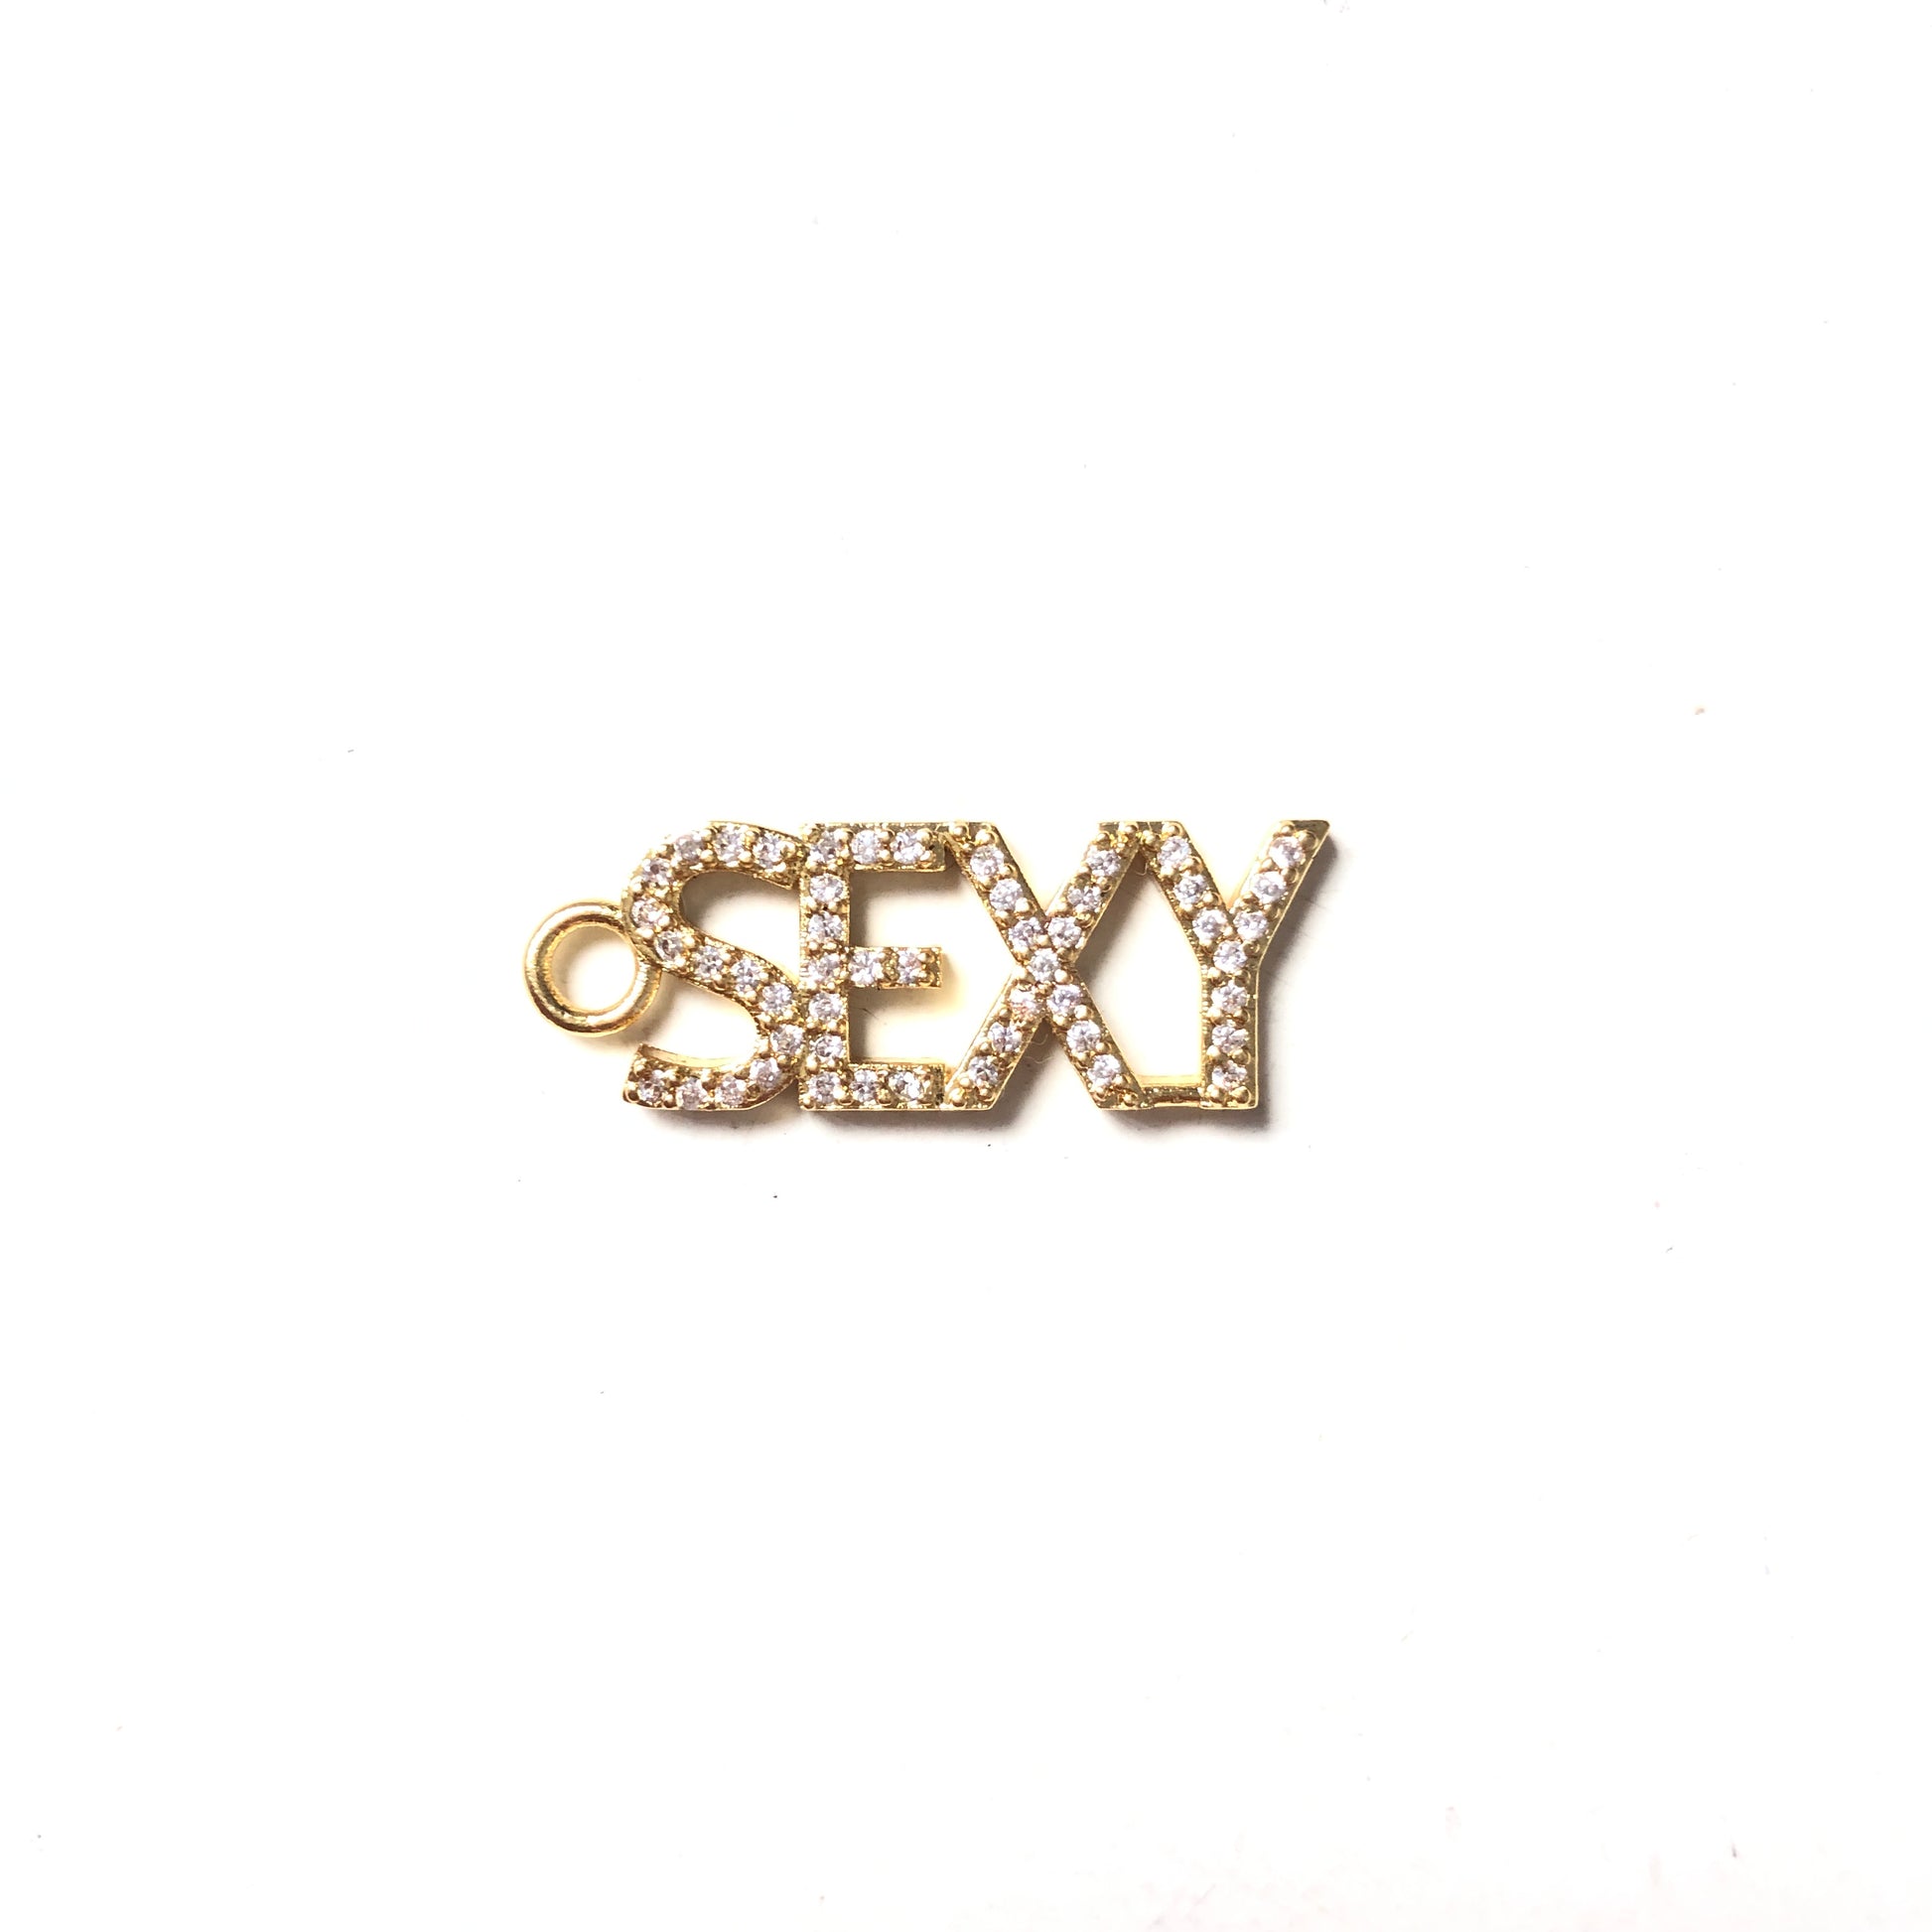 10pcs/lot Gold CZ Paved Letter Charms SEXY-10pc CZ Paved Charms Love Letters Mother's Day Words & Quotes Charms Beads Beyond